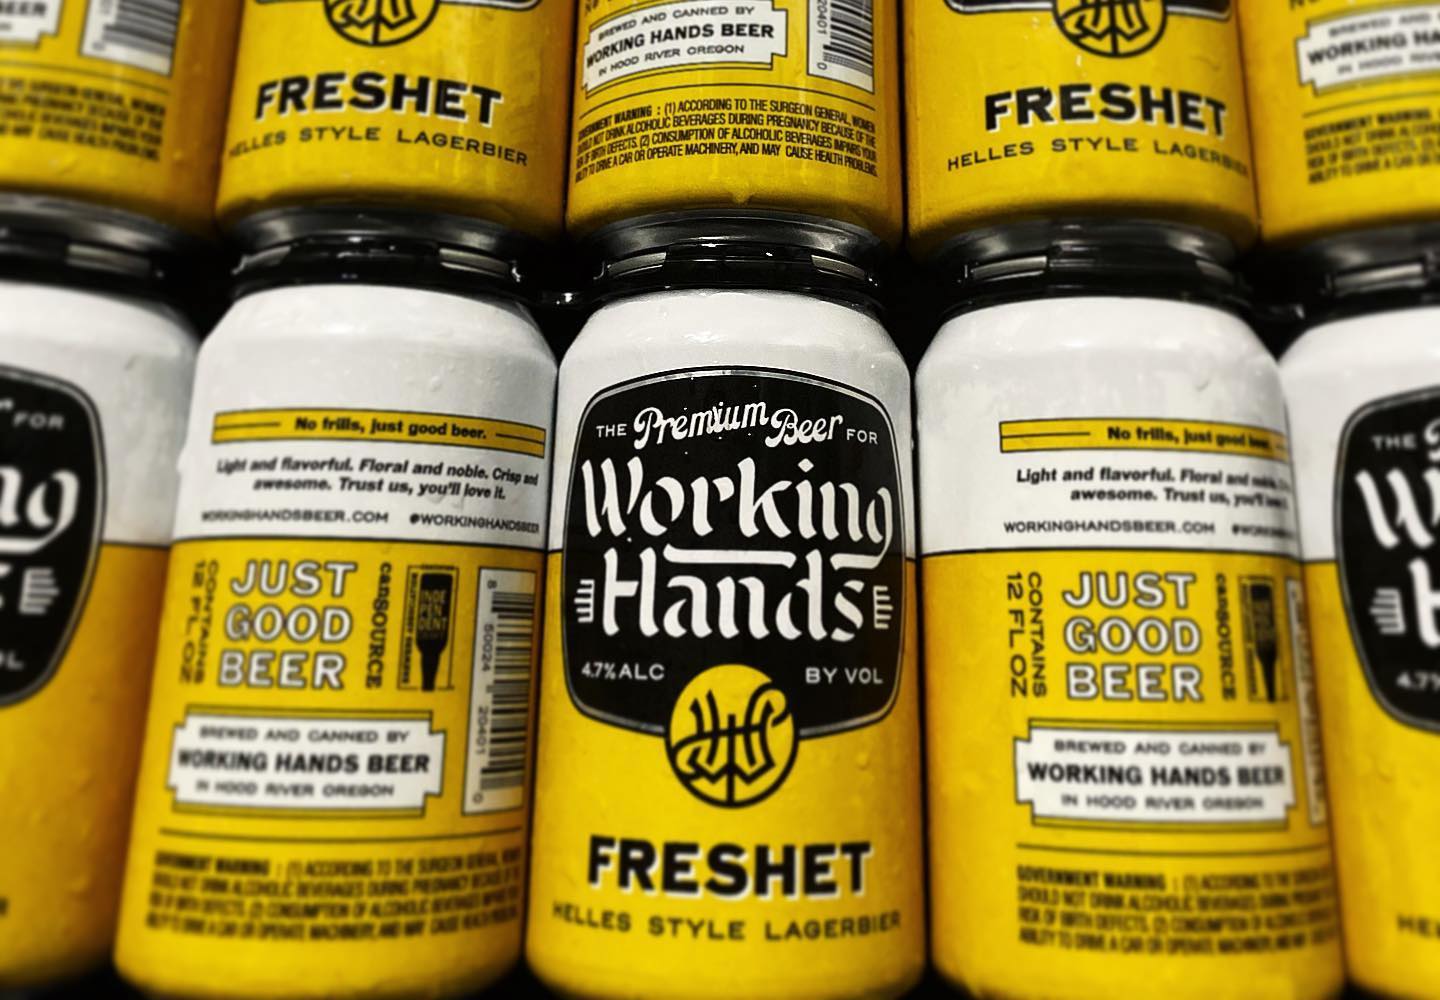 Working Hands Fermentation branded yellow beer can for their Helles Style Lagarbier called Freshet